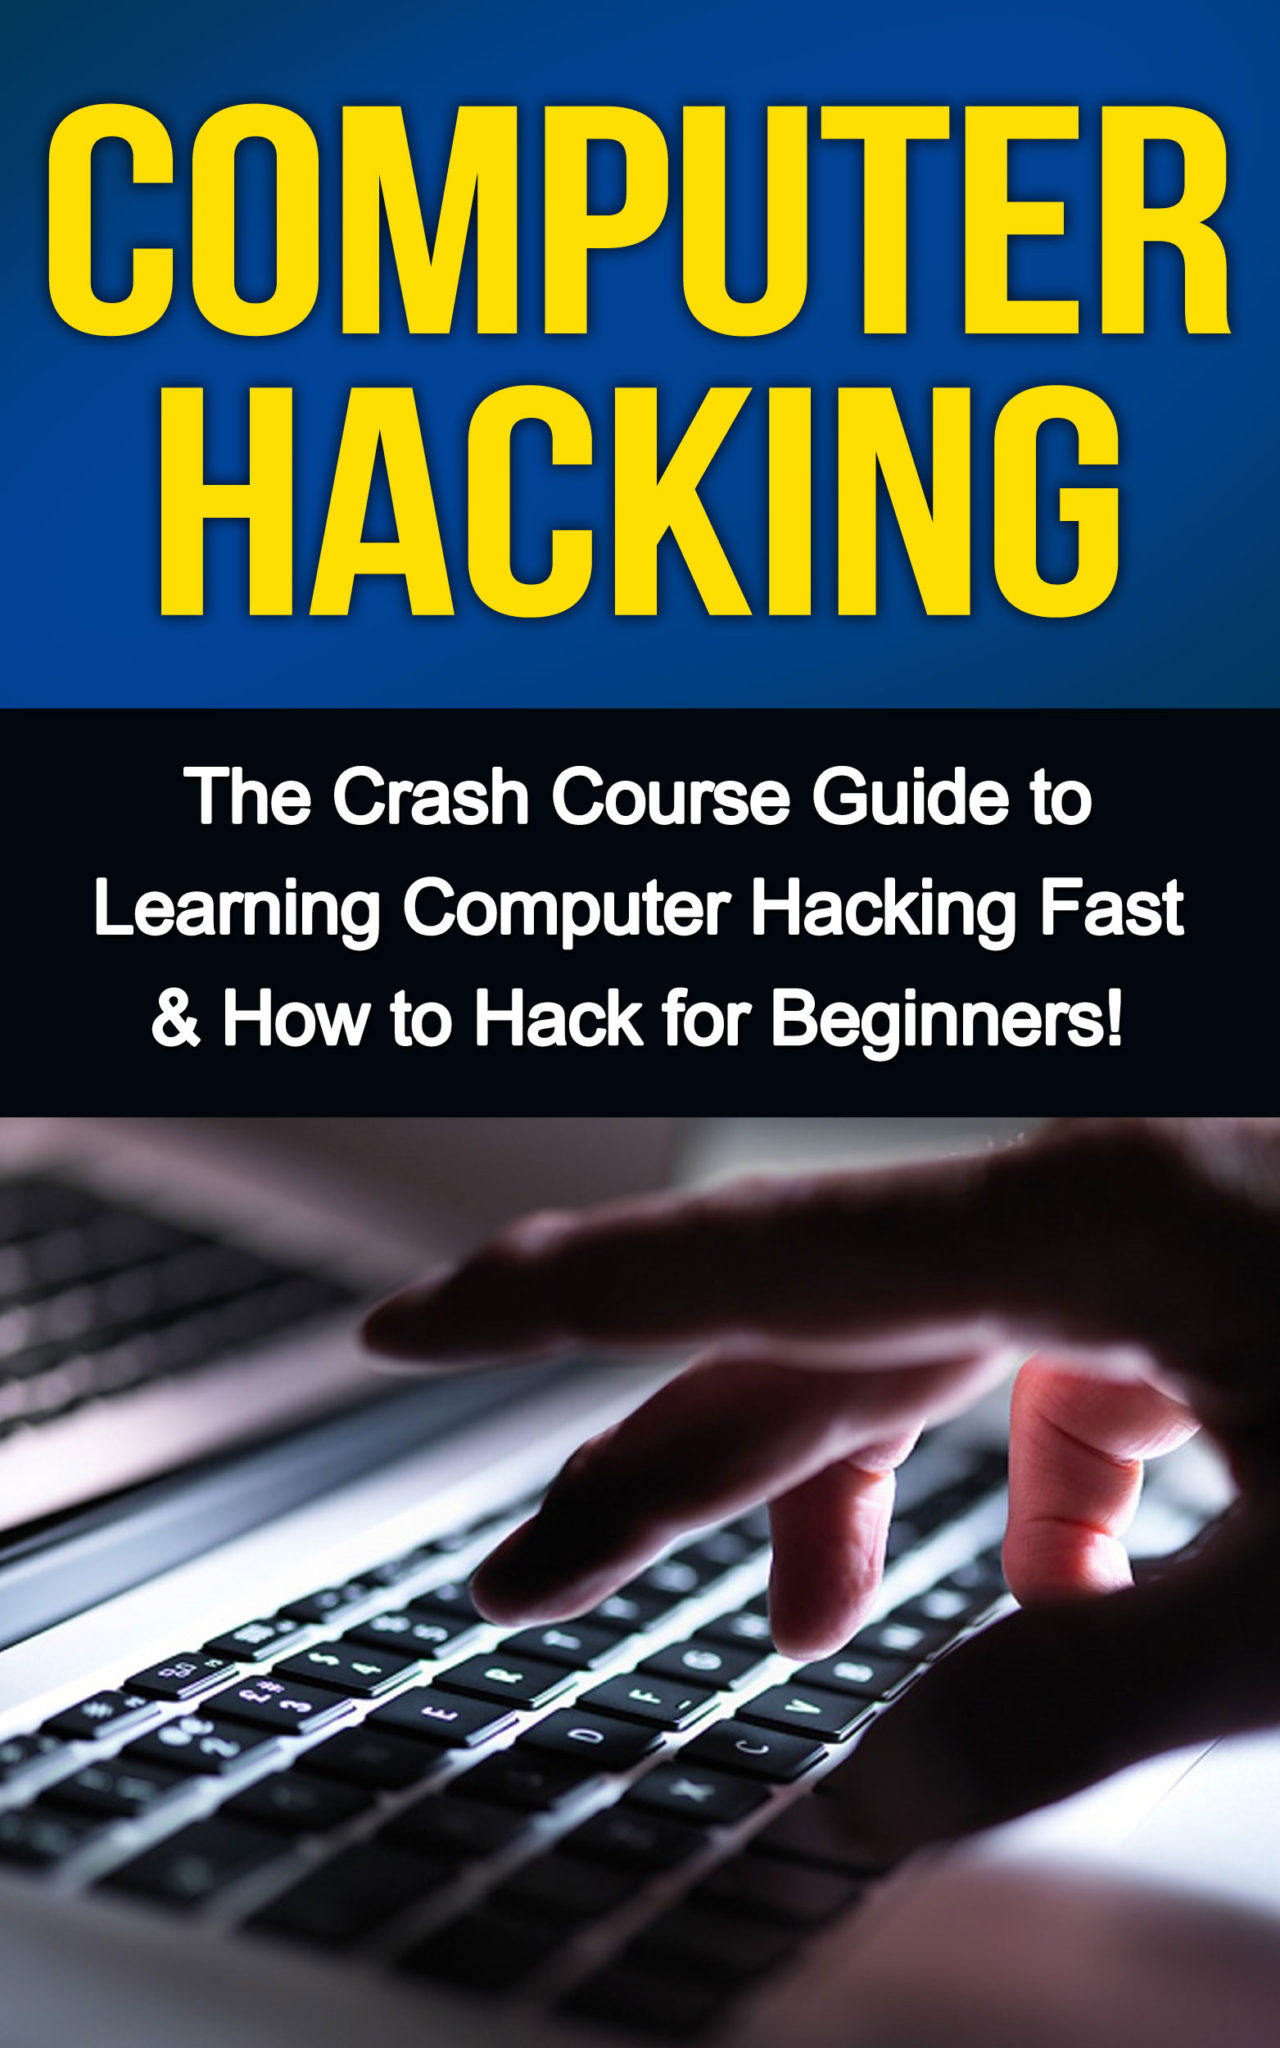 FREE: Computer Hacking: The Crash Course Guide to Learning Computer Hacking Fast & How to Hack for Beginners by Tim Warren